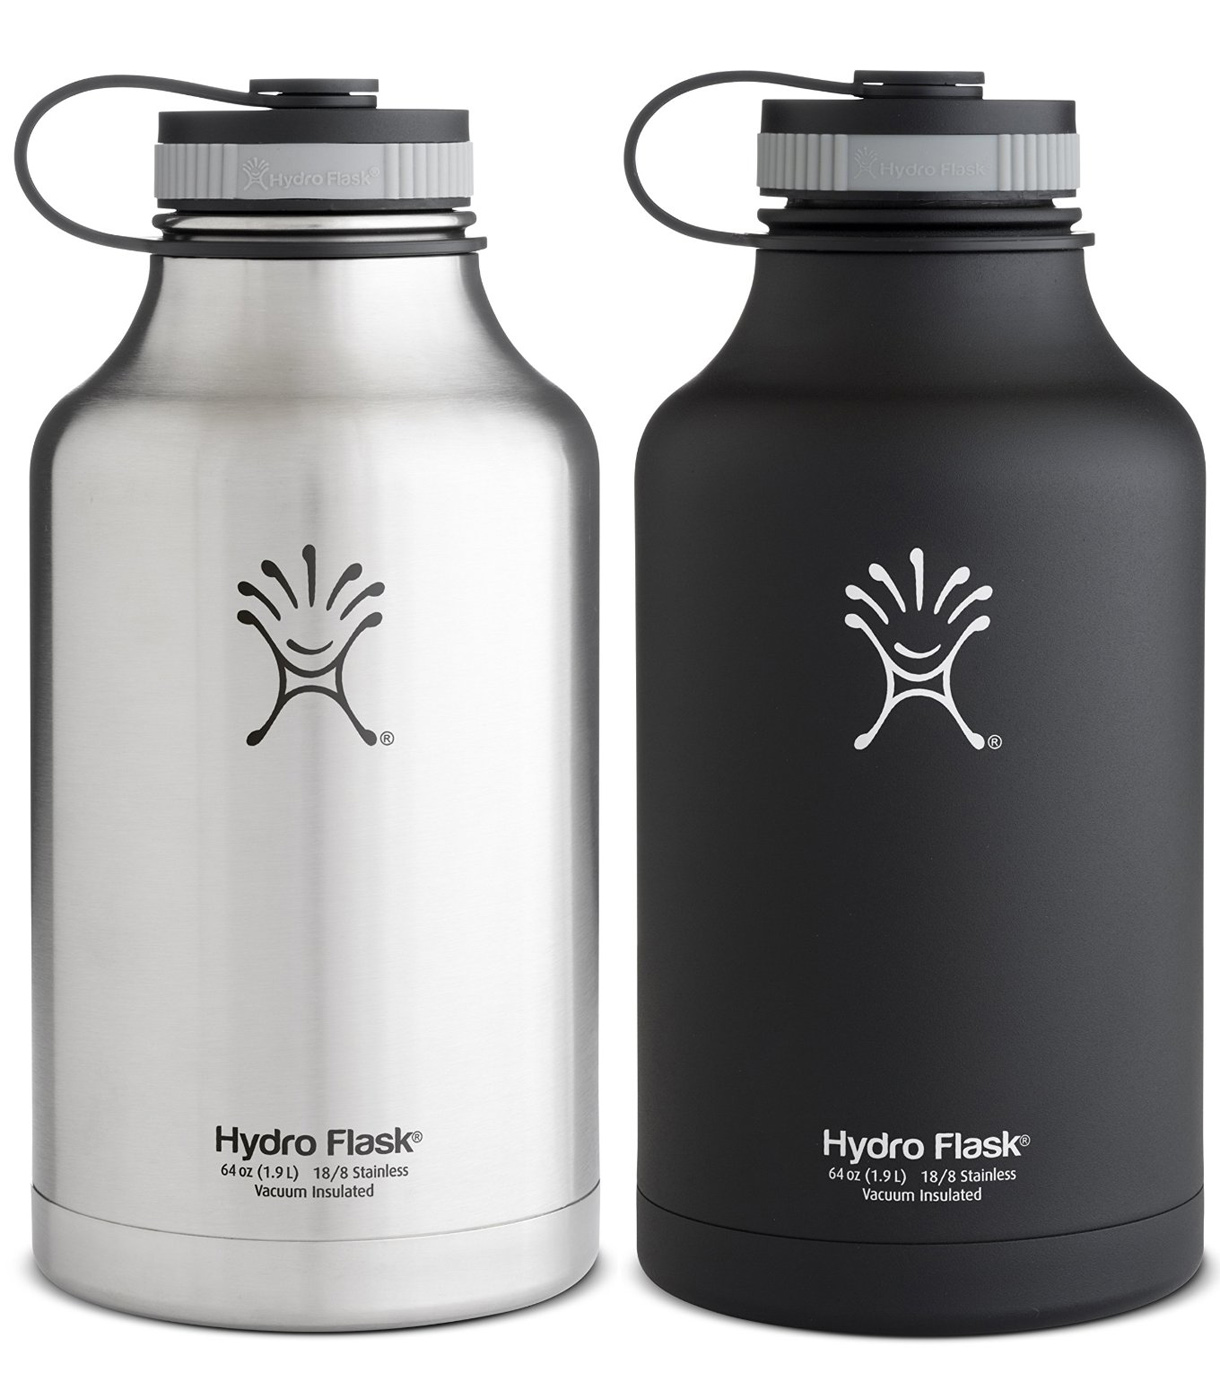 Hydro Flask Insulated growler